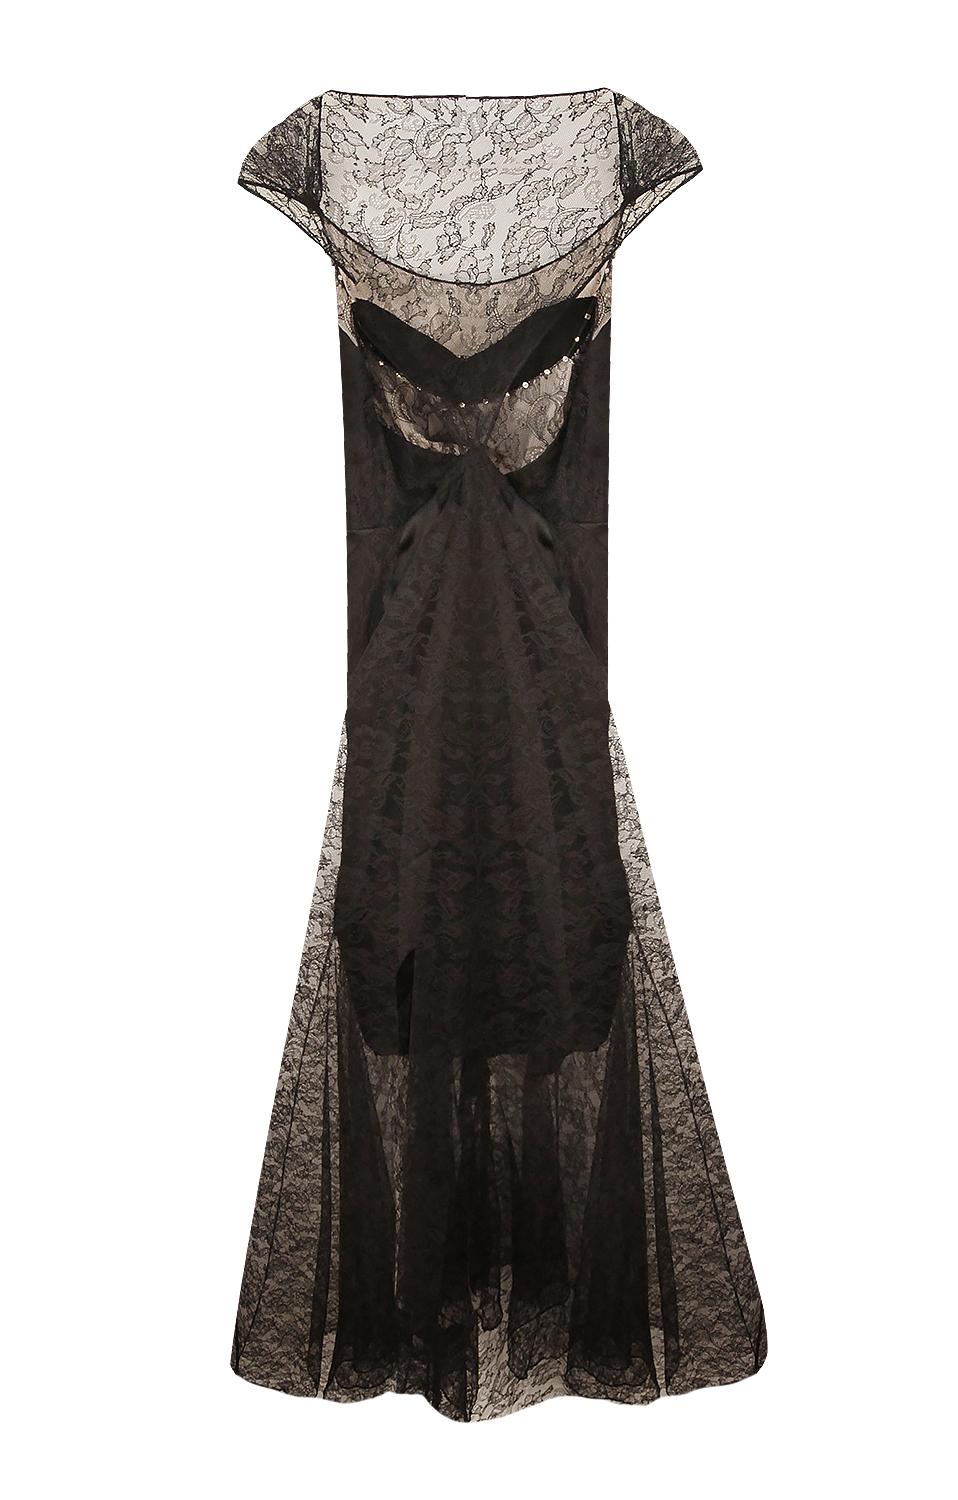 Chanel Haute Couture Lace Gown 1940s For Sale 3